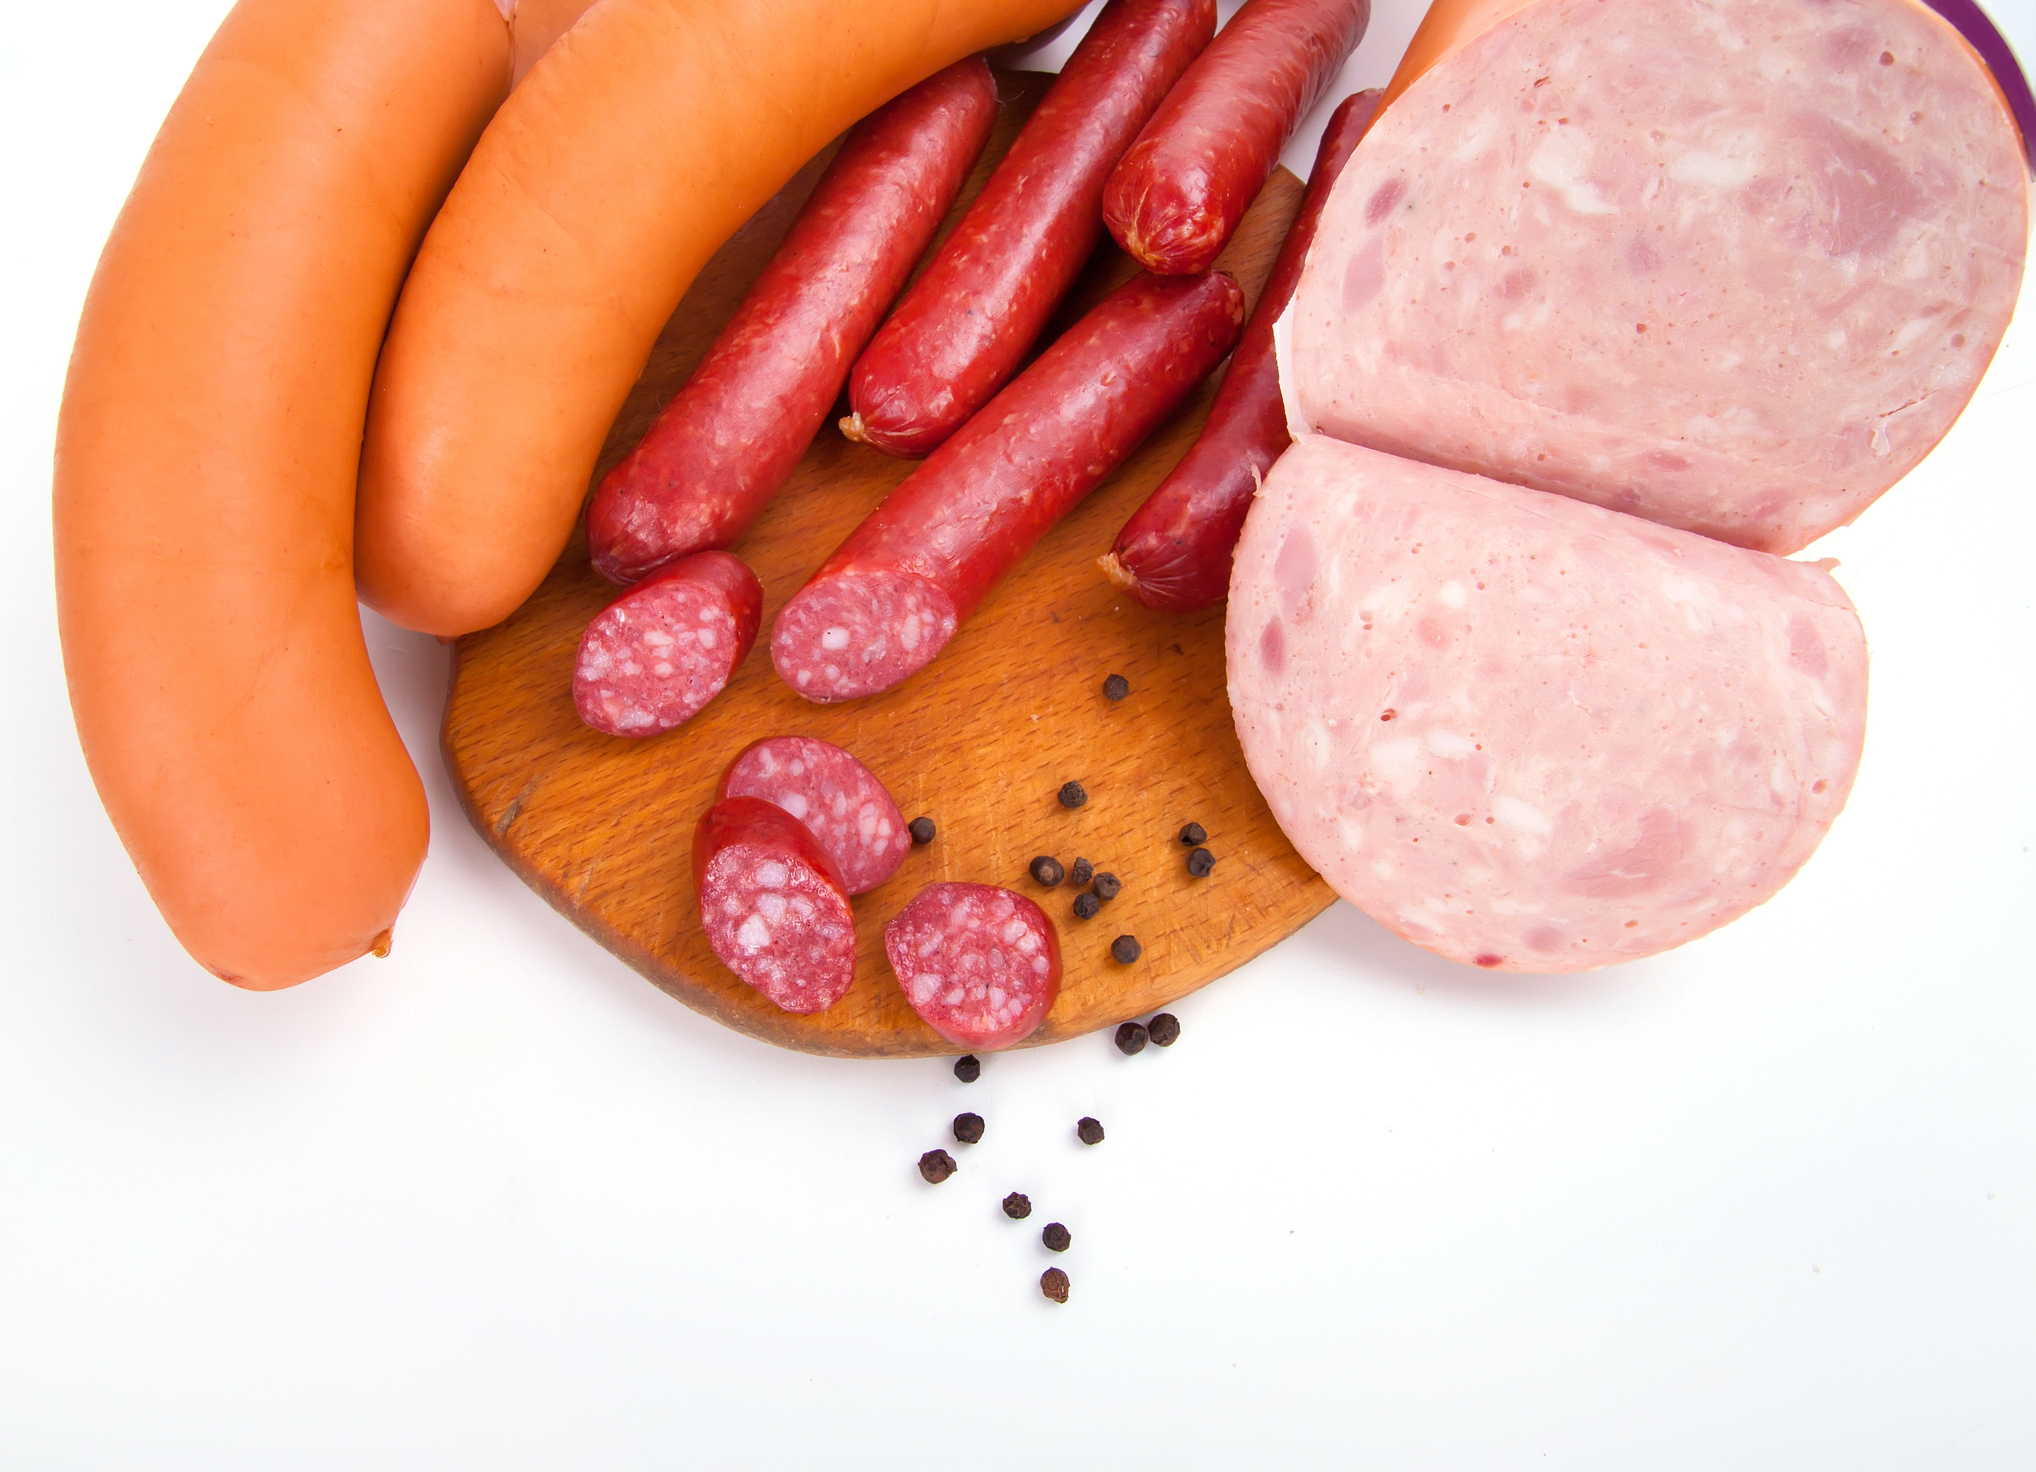 Processed meats carcinogenic says WHO